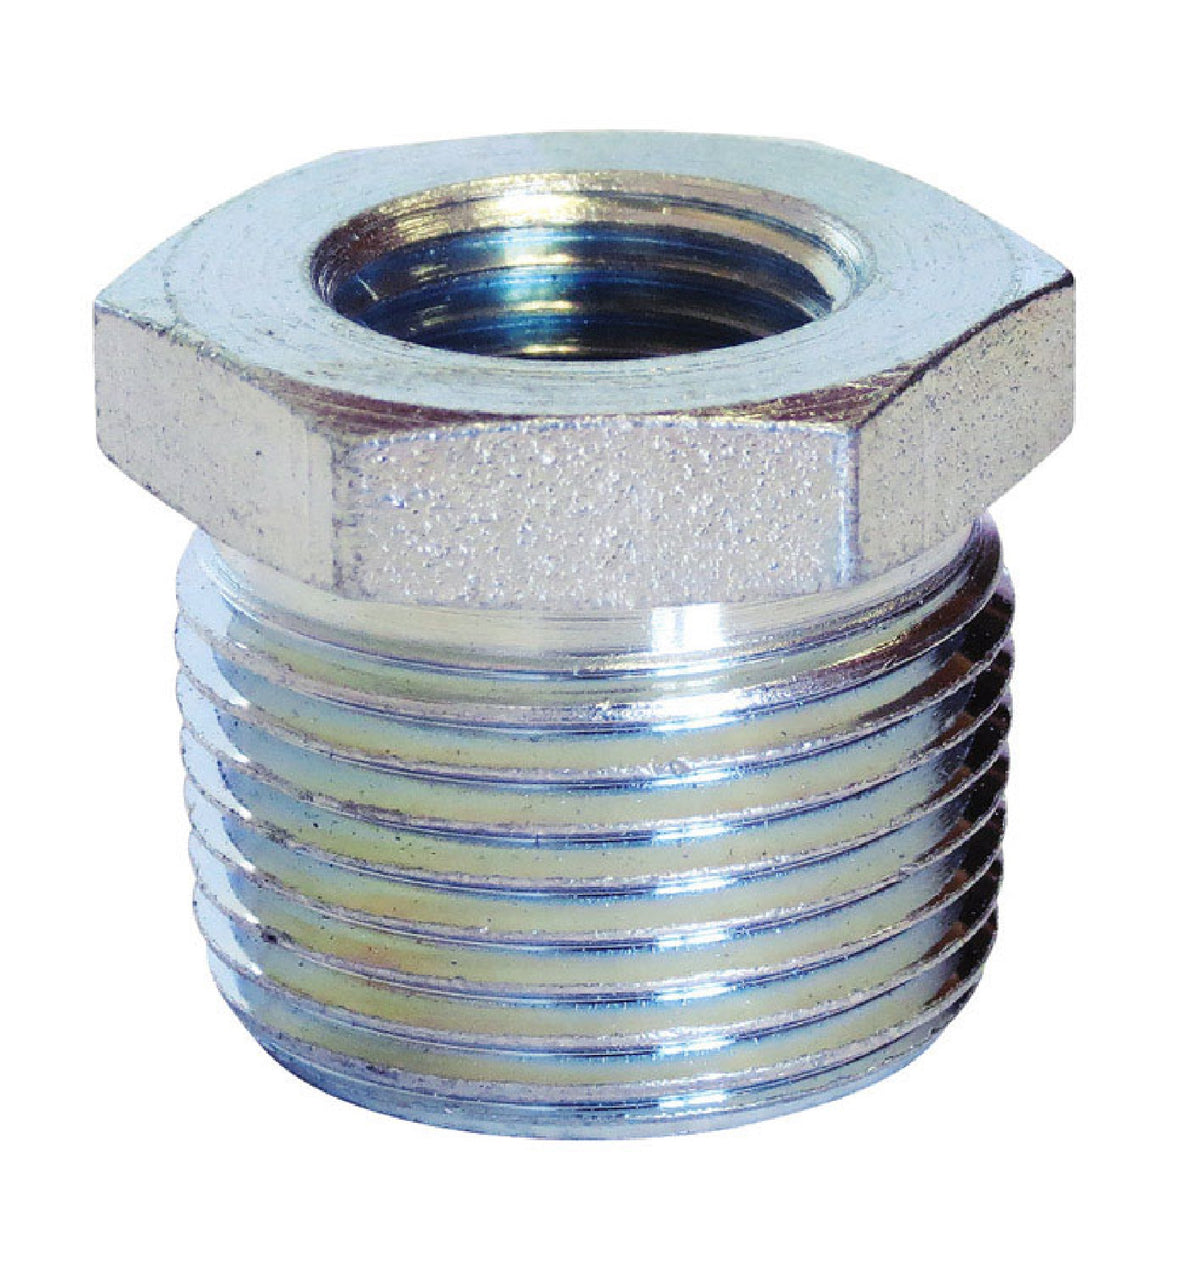 buy galvanized pipe bushing at cheap rate in bulk. wholesale & retail professional plumbing tools store. home décor ideas, maintenance, repair replacement parts